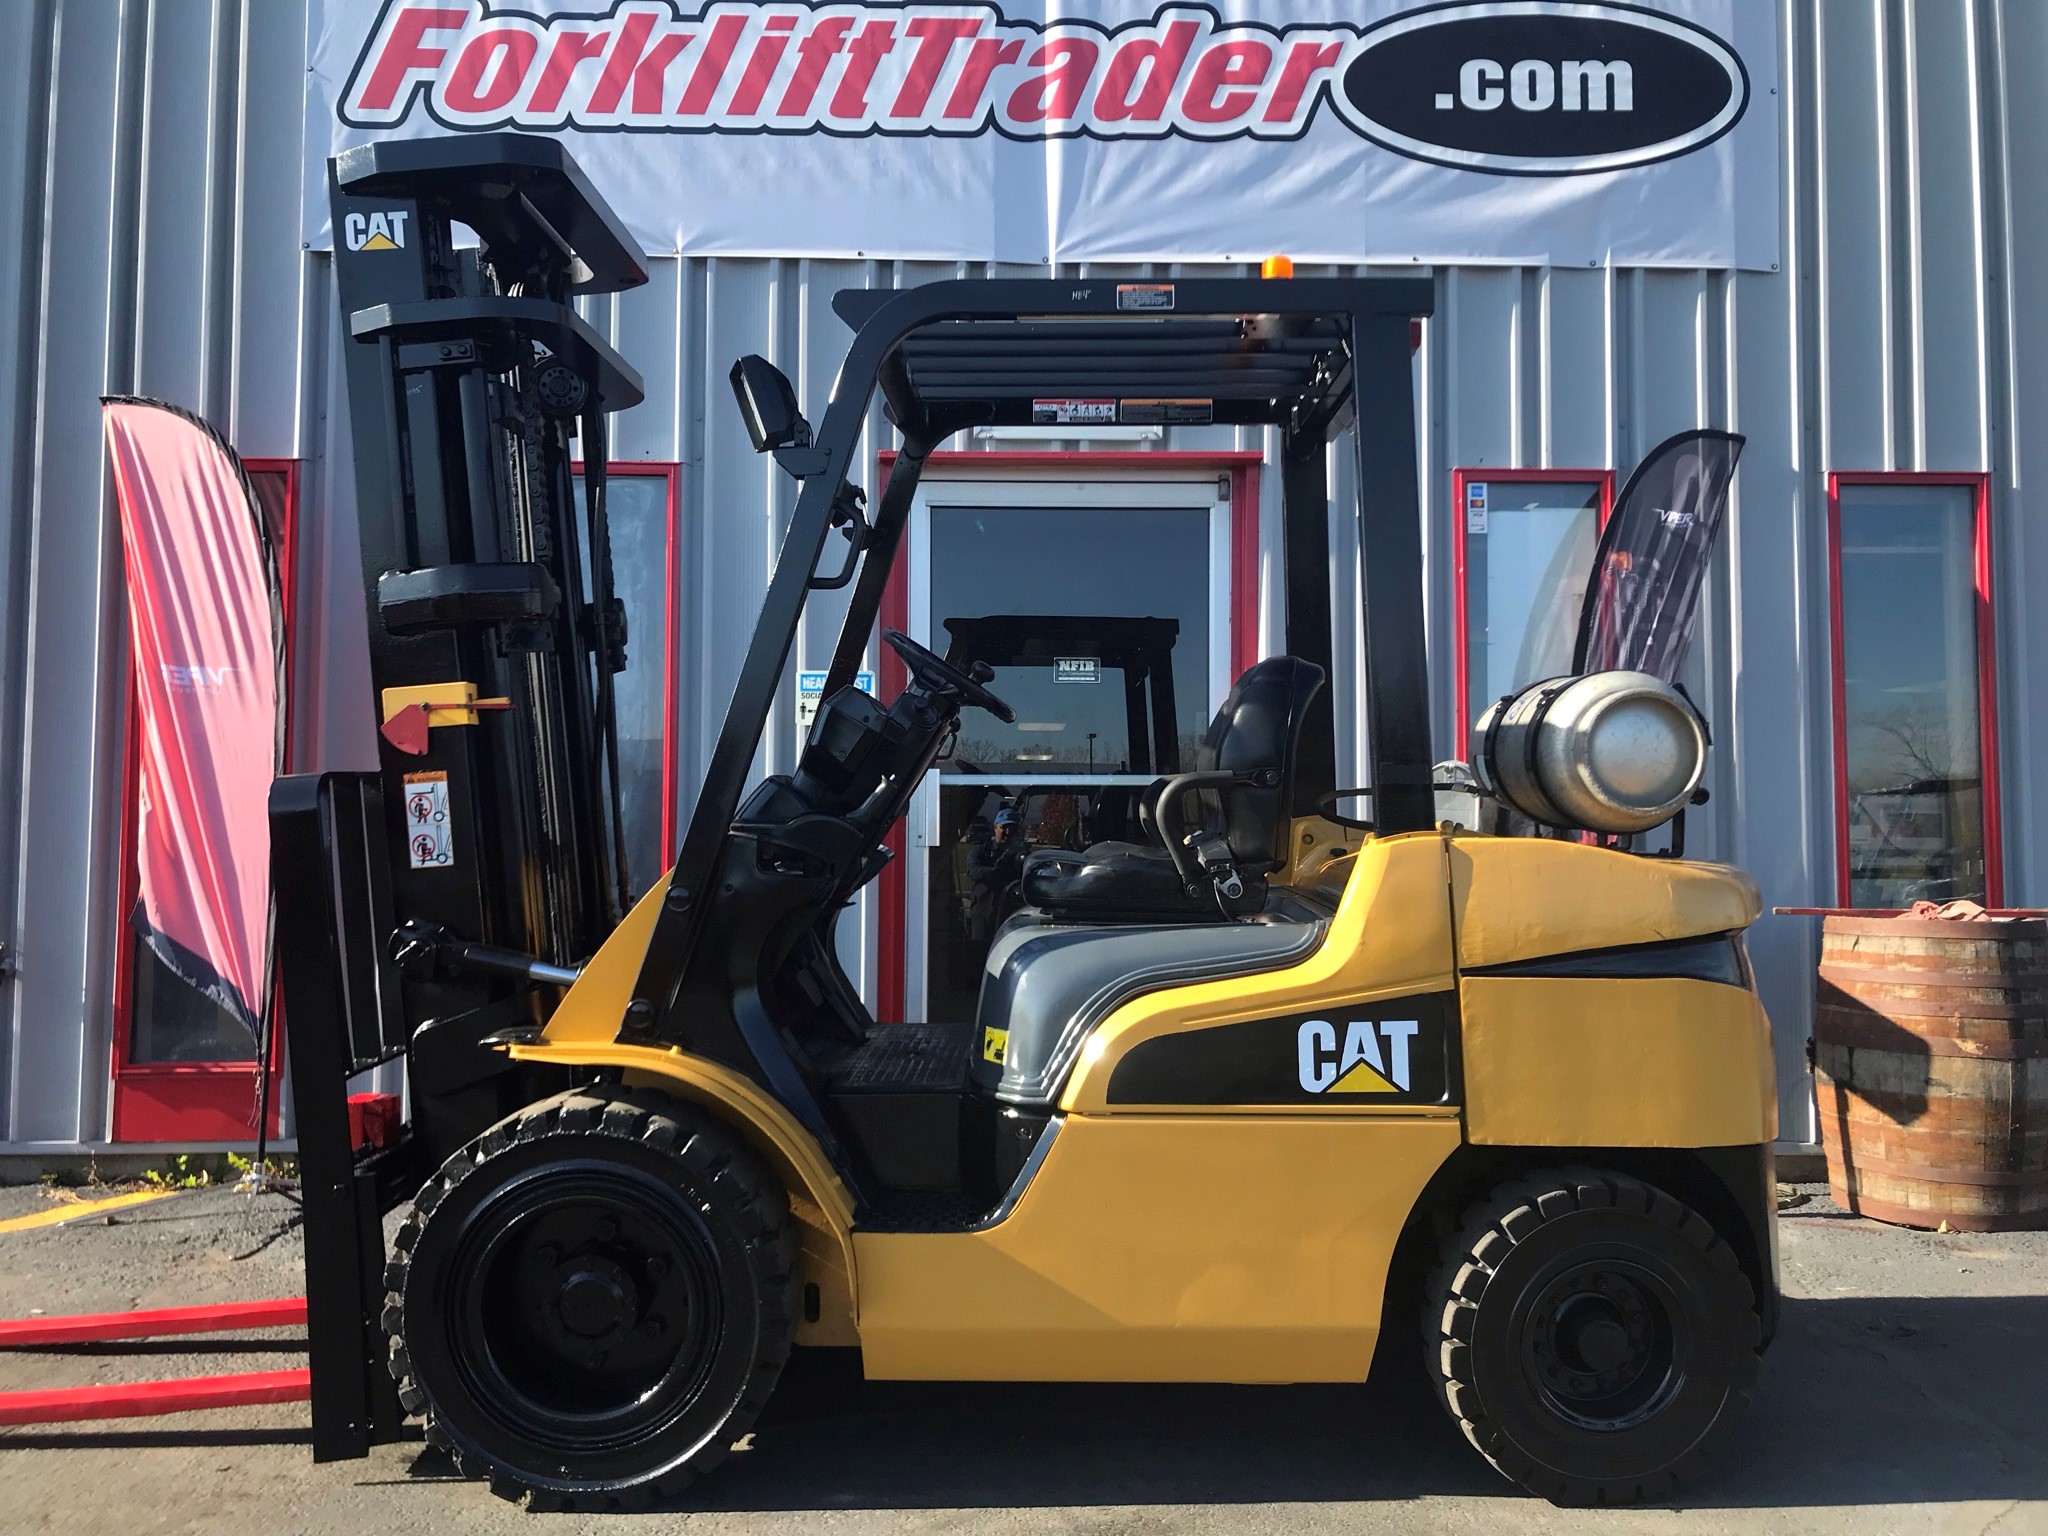 2005 cat forklift with 216" lift height for sale